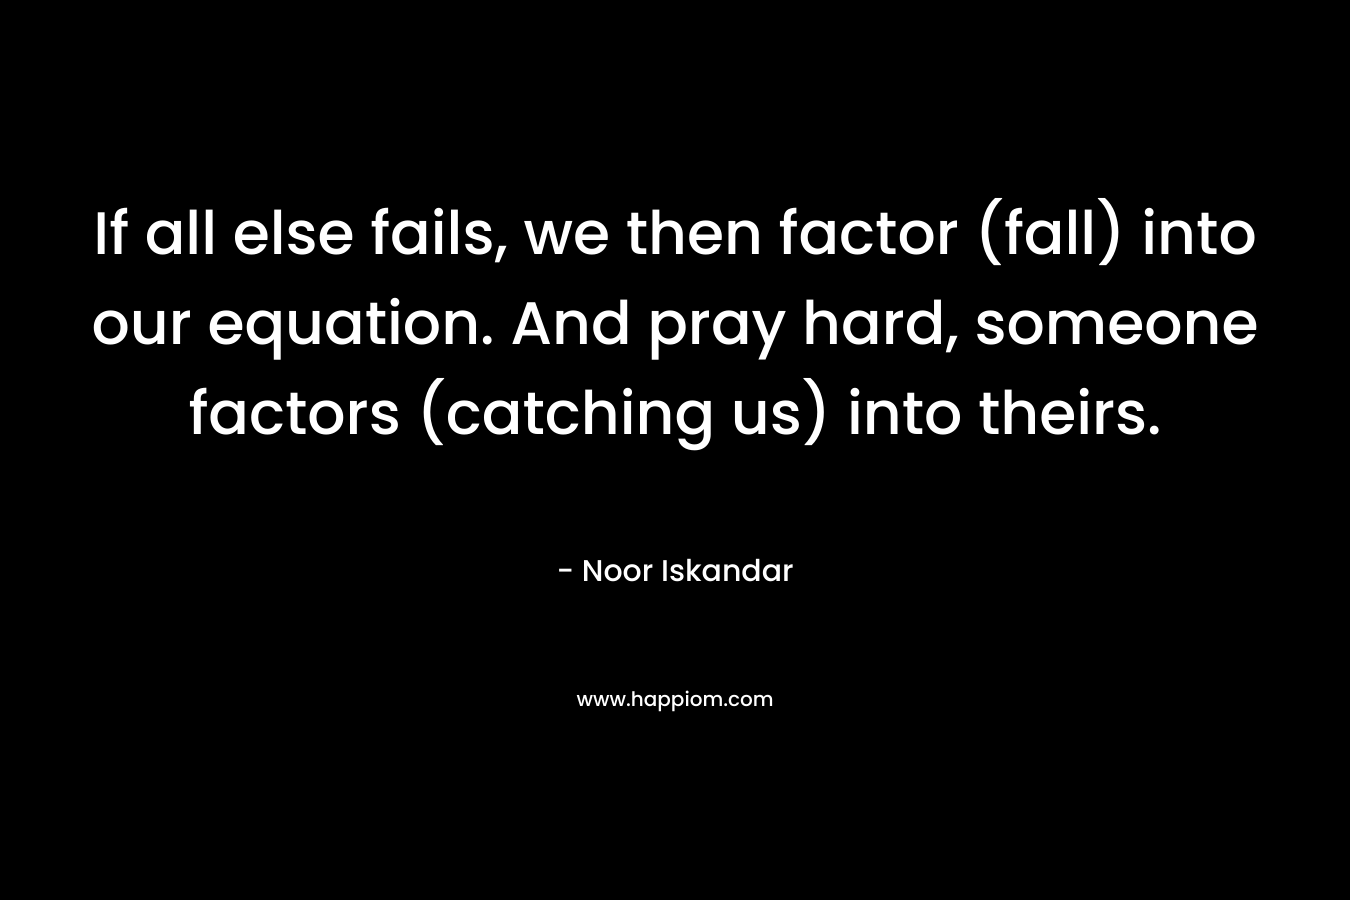 If all else fails, we then factor (fall) into our equation. And pray hard, someone factors (catching us) into theirs.